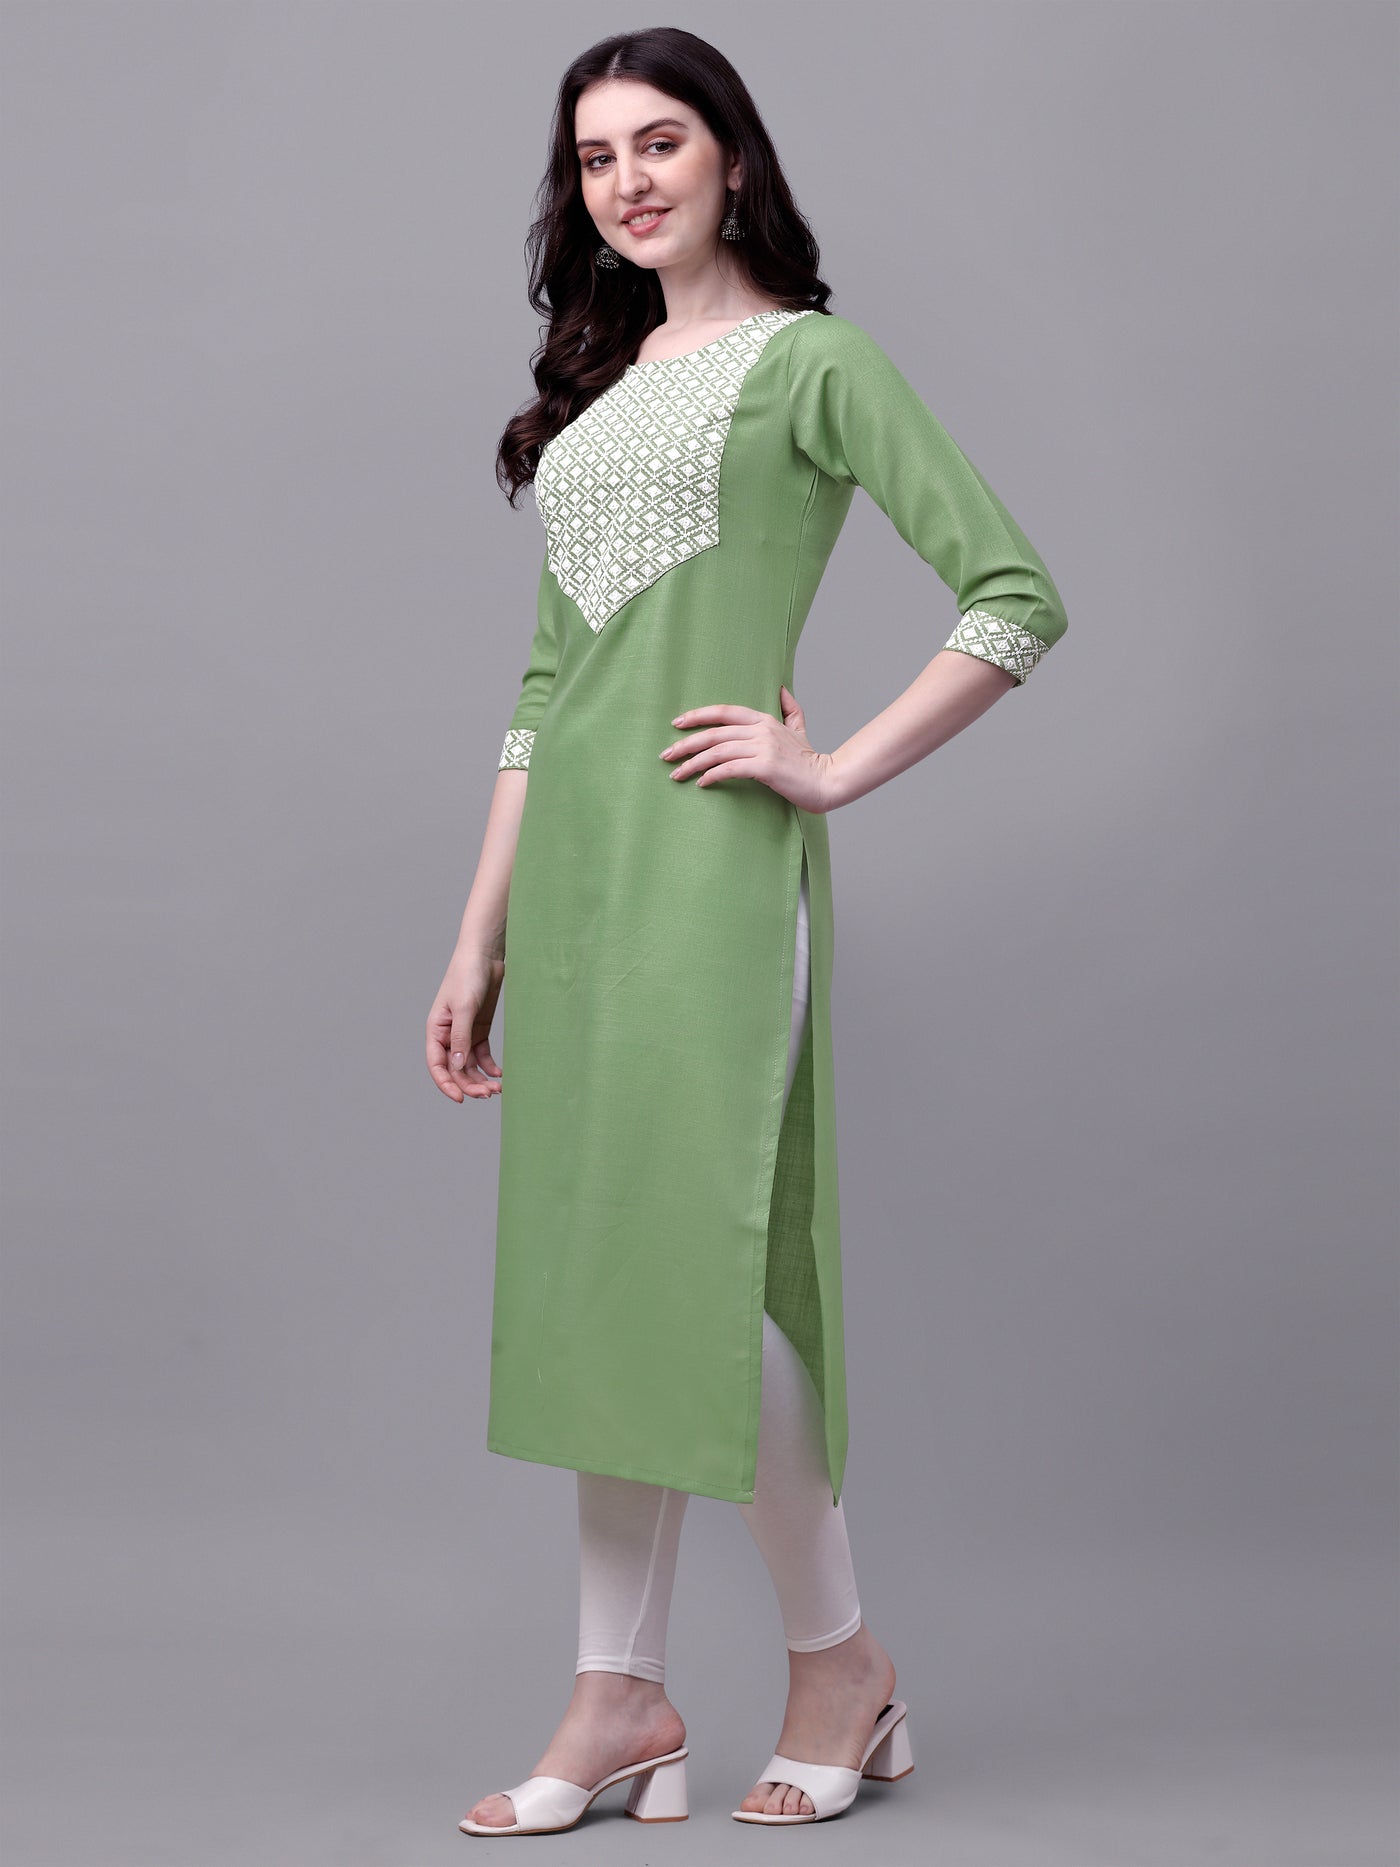 Straight cut Cotton Green Kurti With Beautiful Embroidery Work VK1